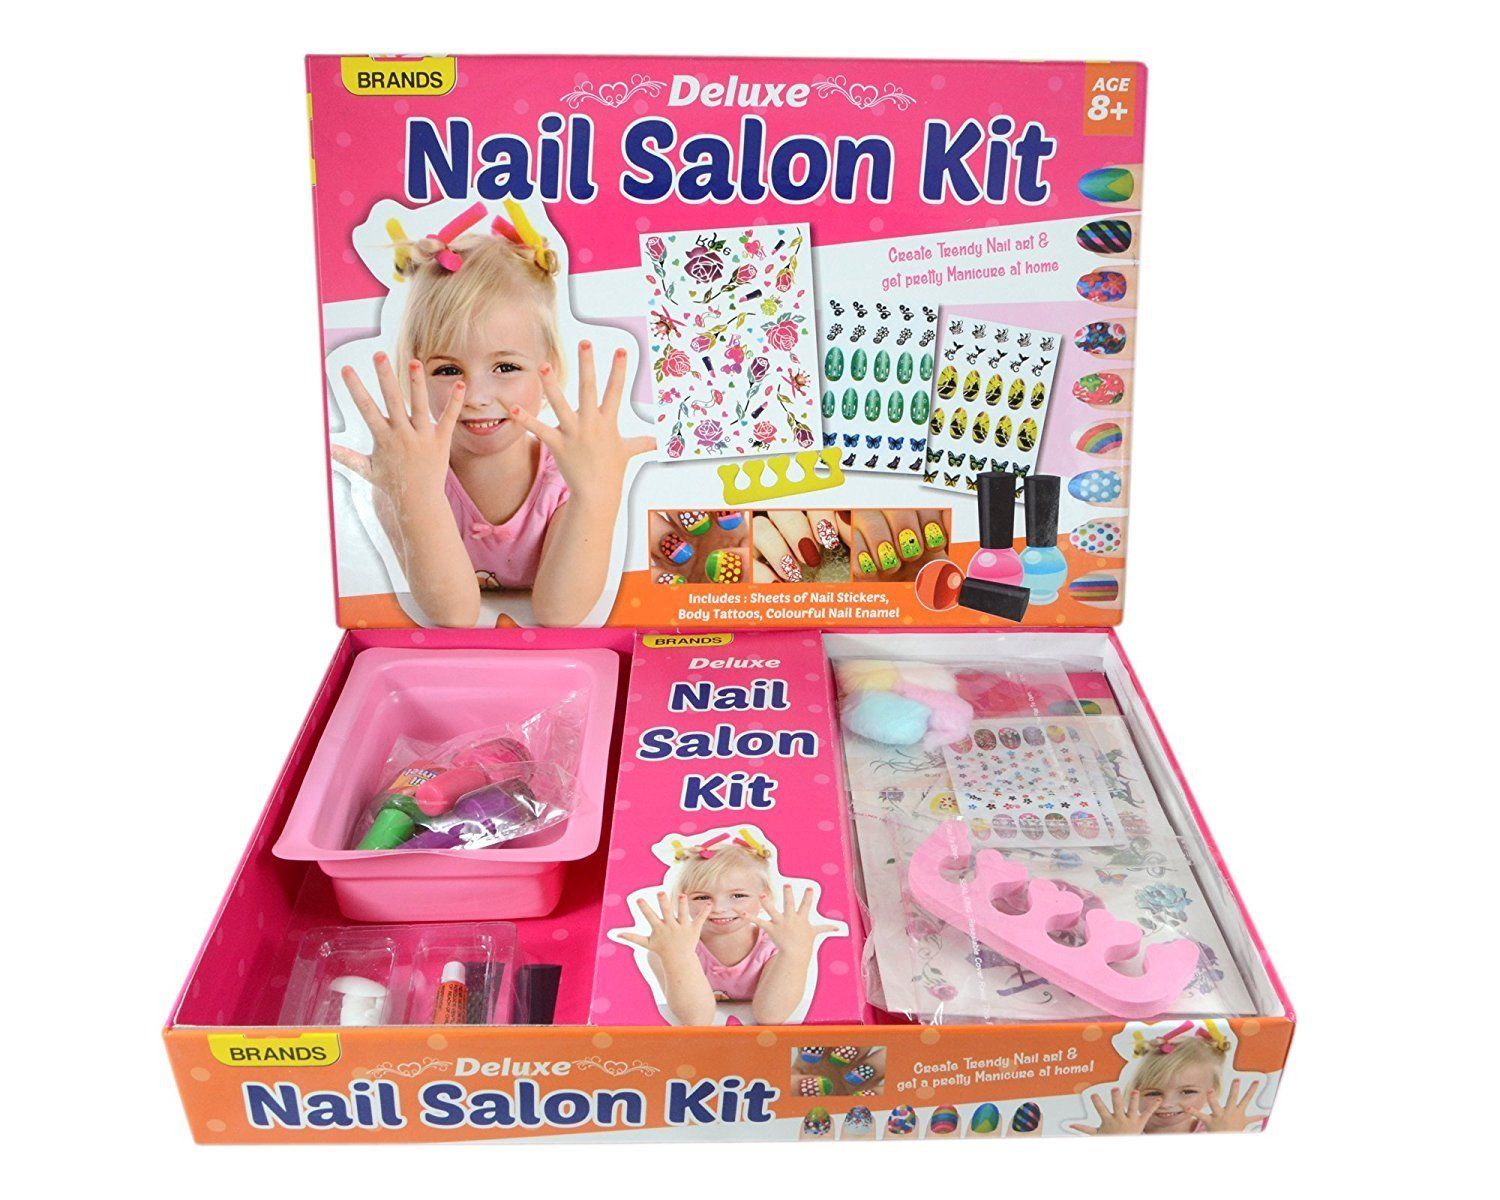 Cool Maker GO GLAM U-nique Metallic Nail Salon with 200 Icons and Designs 4  Polishes Stamper & Dryer Nail Kit for Girls Amazon Exclusive Go Glam  U-nique Nail Salon